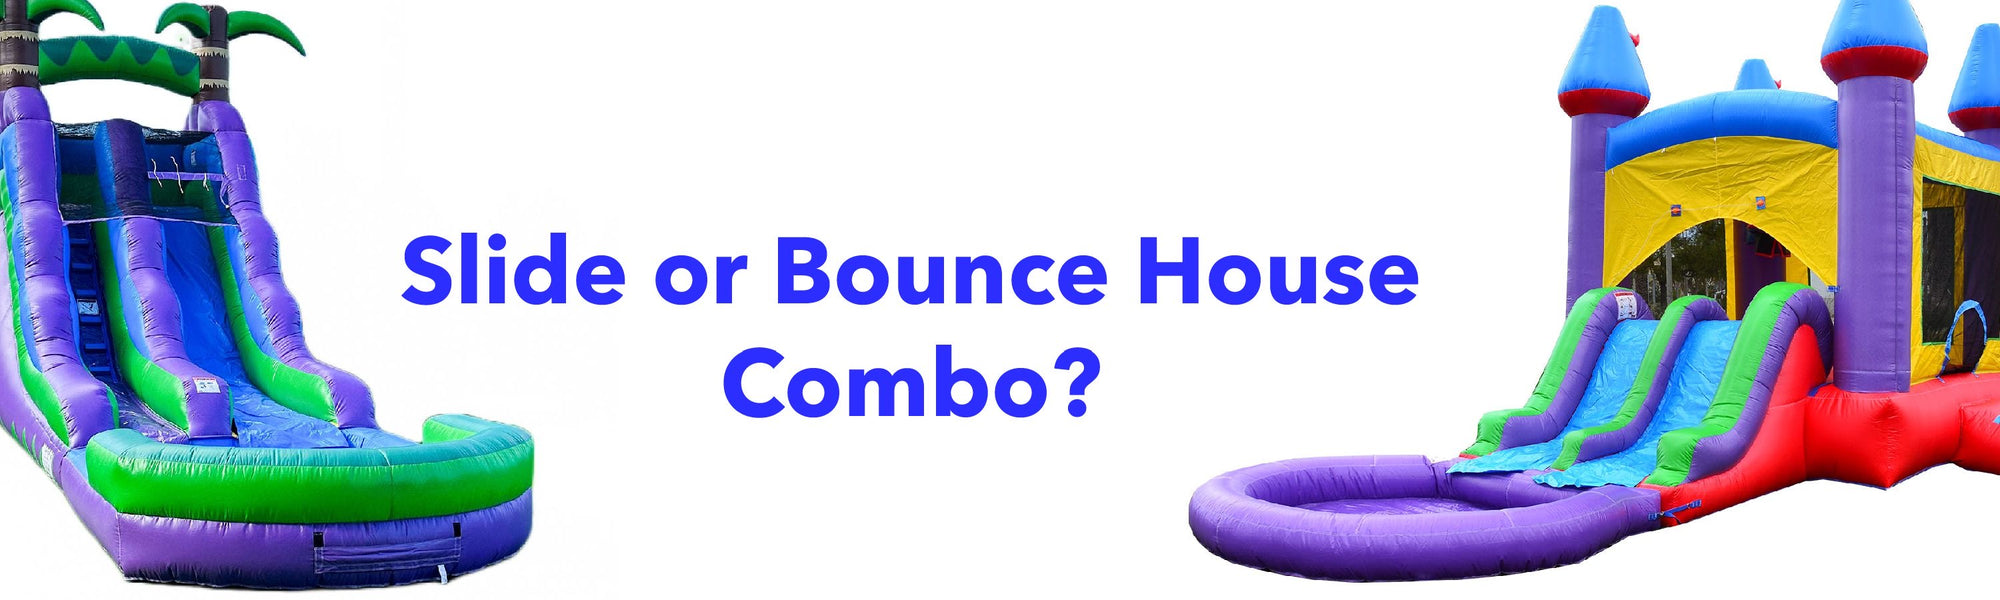 Should I purchase a slide or bounce house combo?